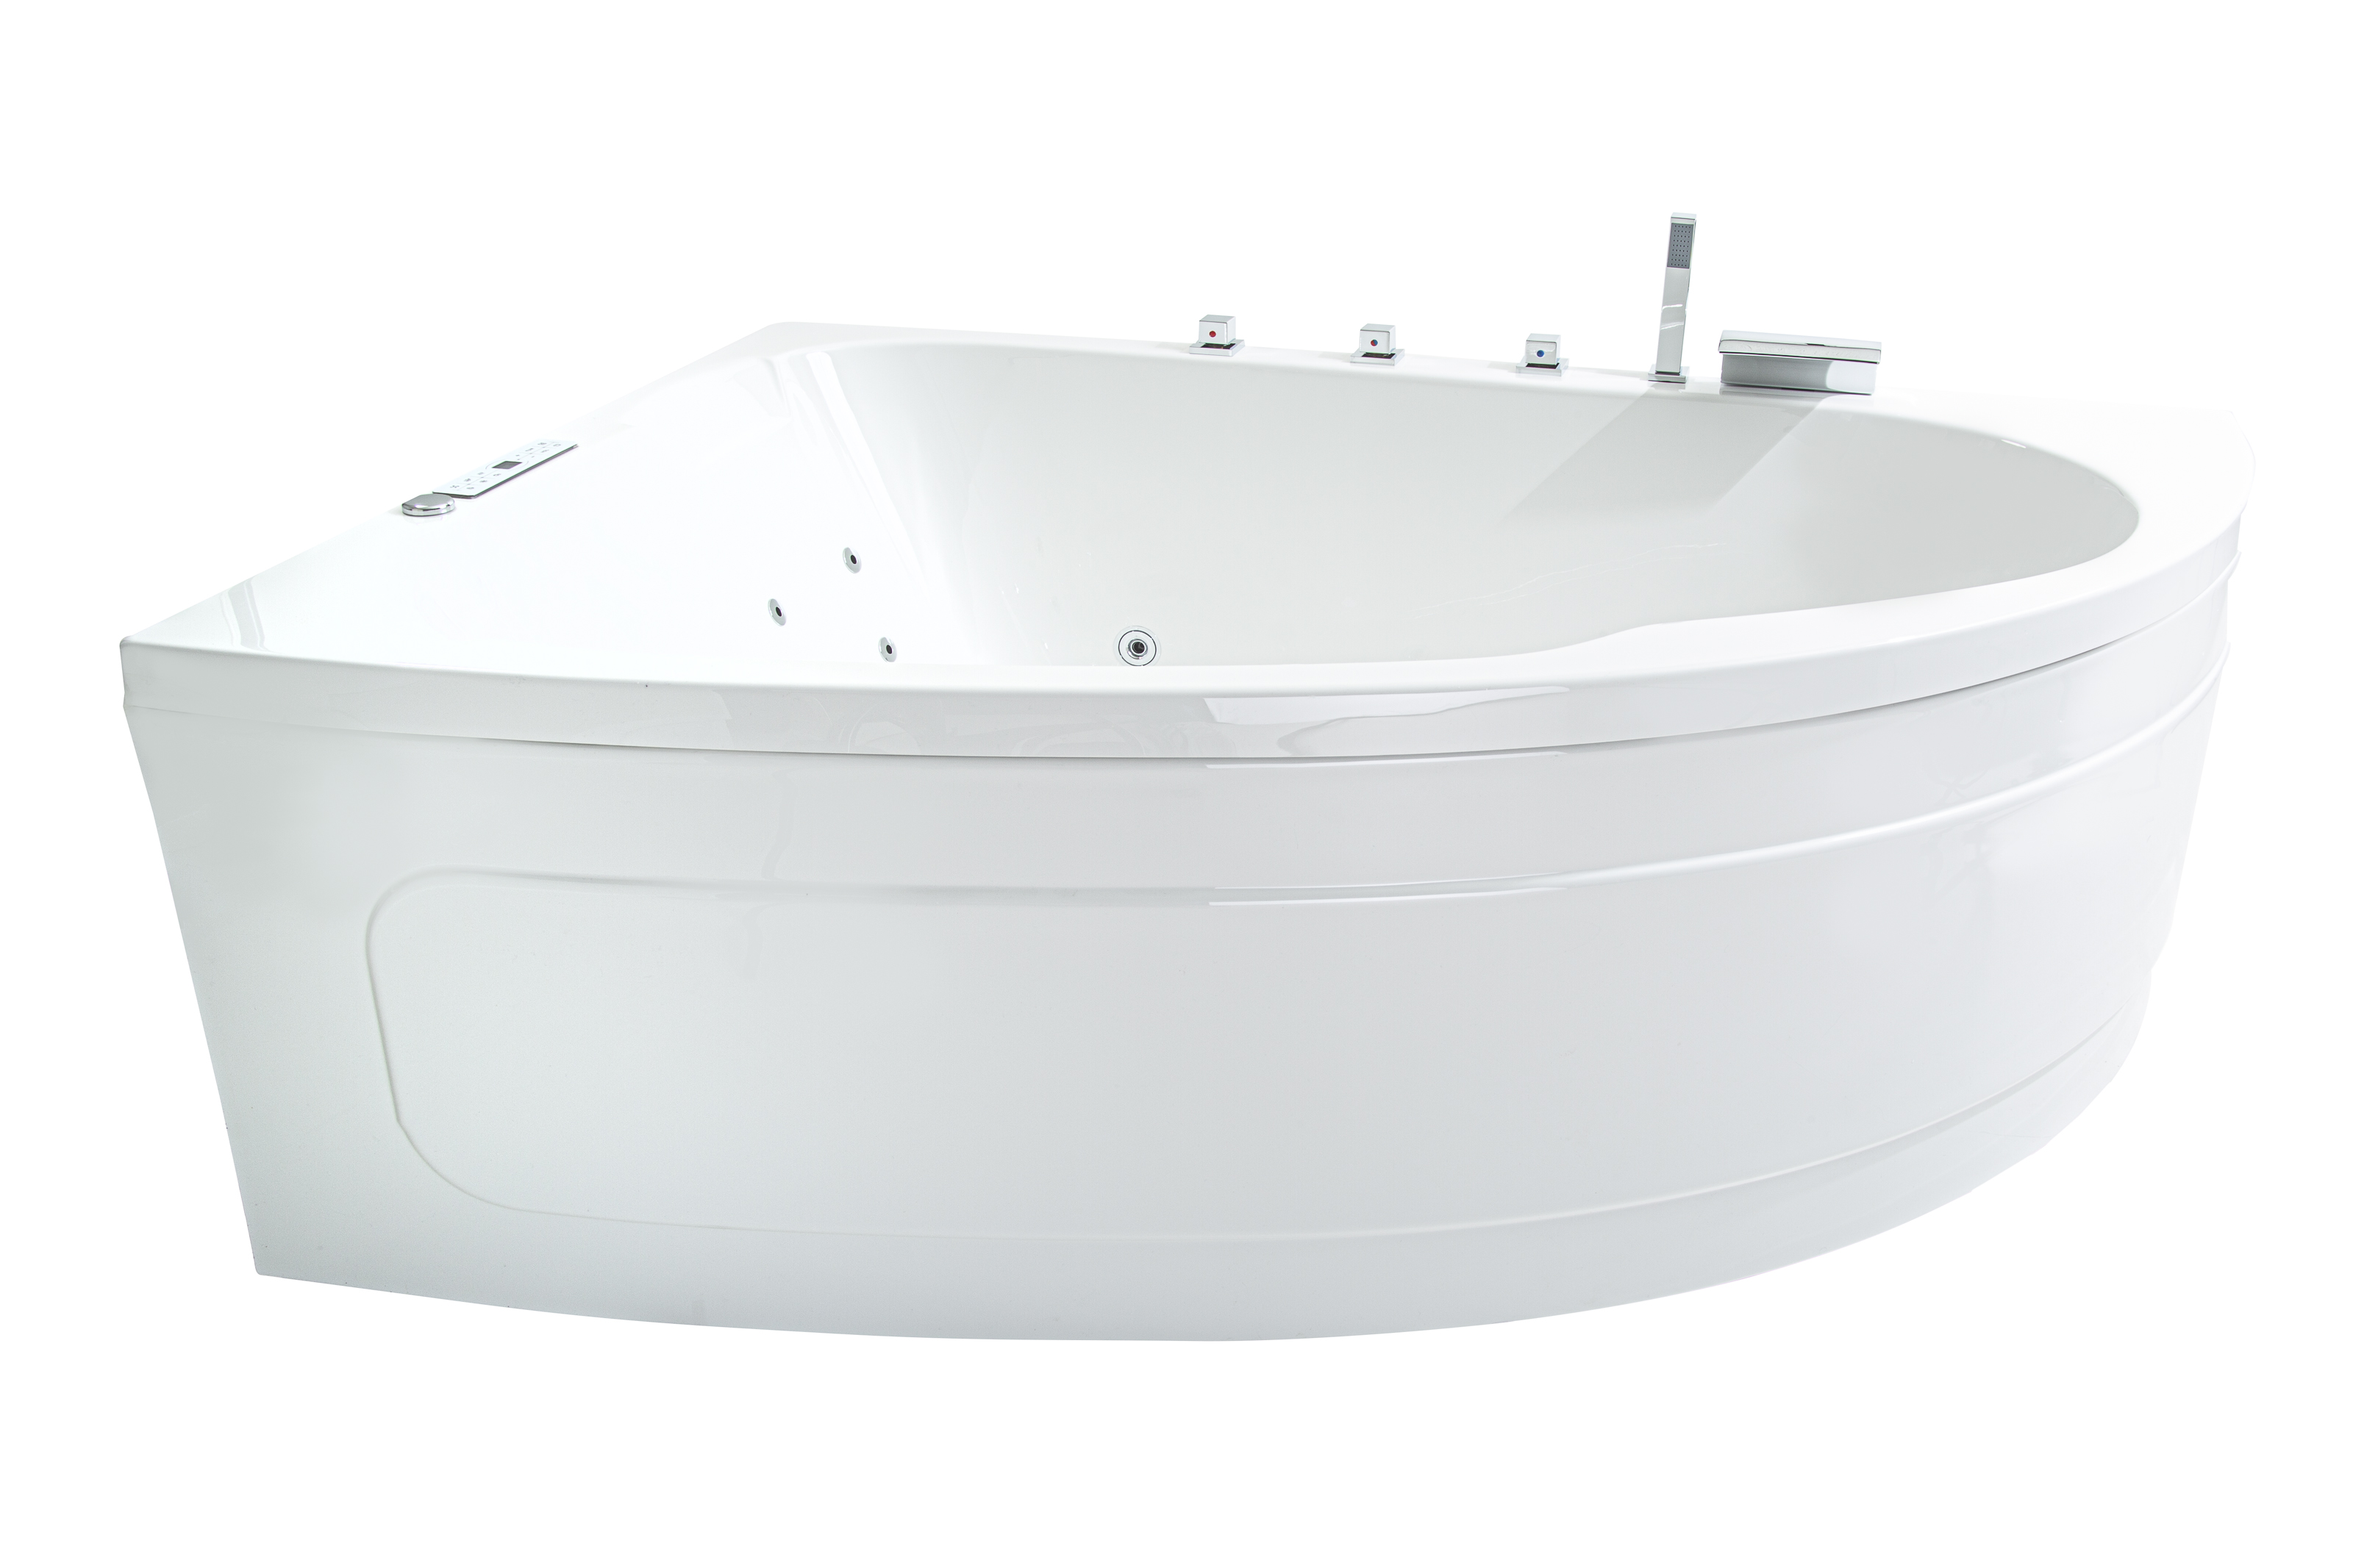 Baignoire d'angle Whirlpool Spa Bali Tulamben TWO Links 180x130 cm blanc MADE IN GERMANY